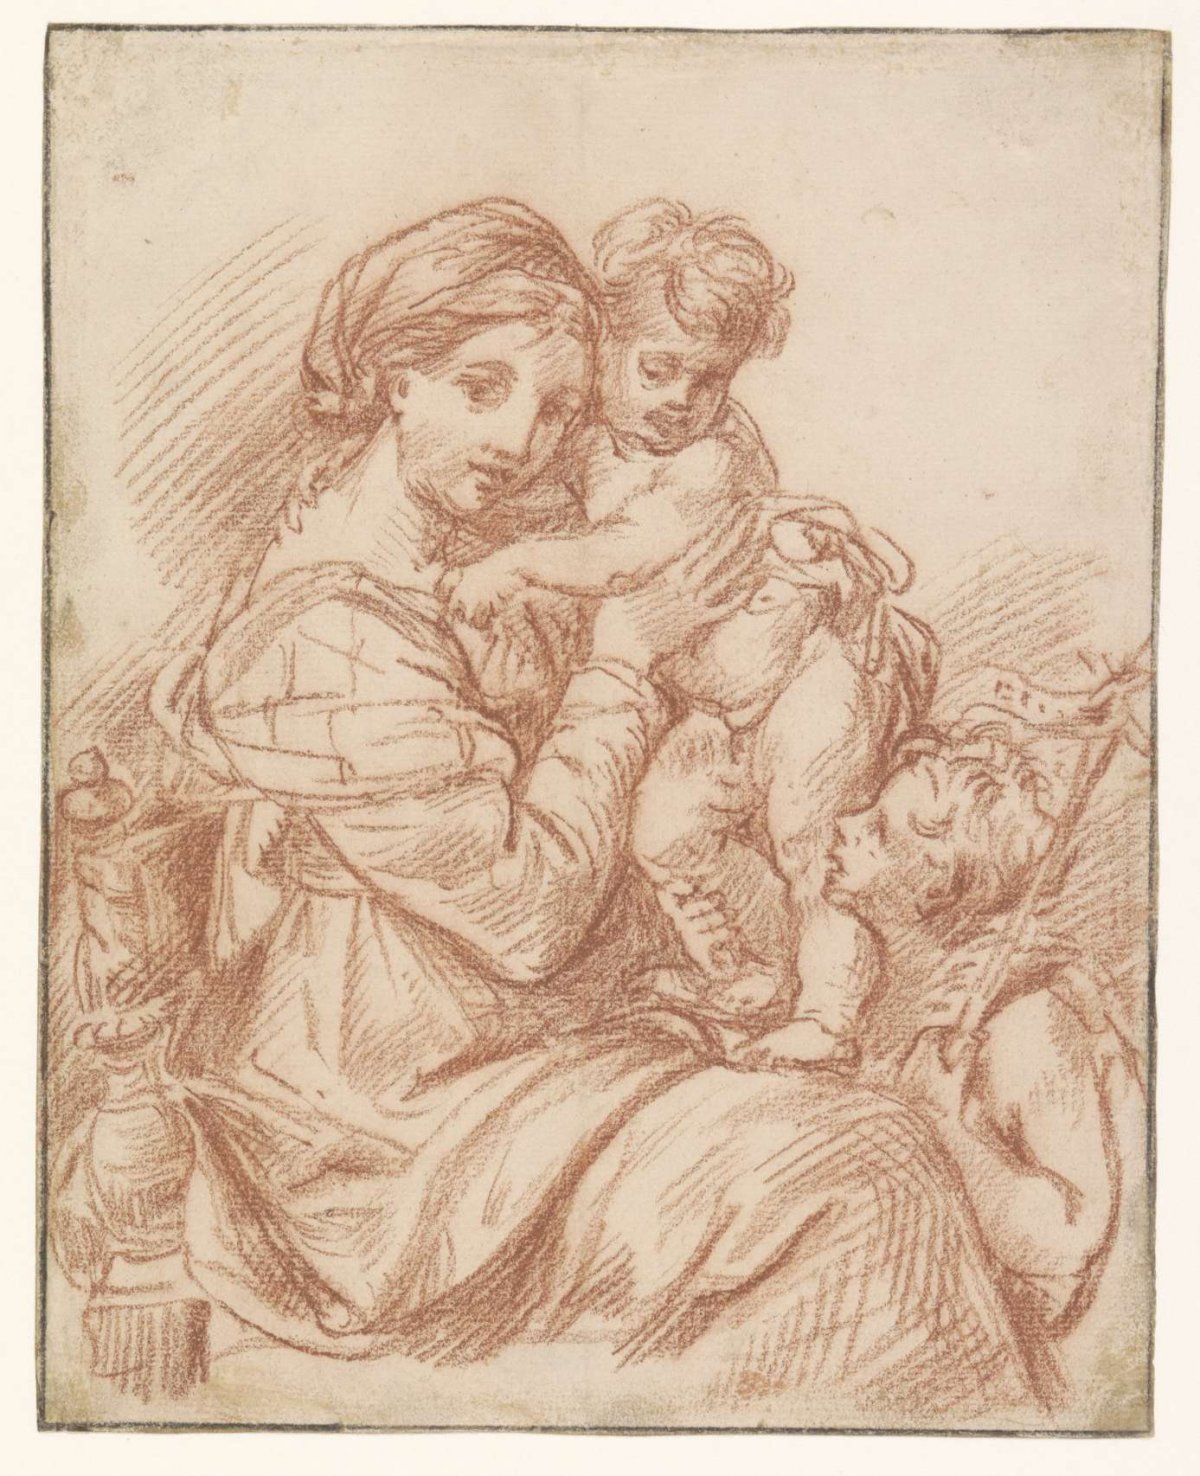 H. Virgin with the Christ child in her lap, Pierre Mignard (1612-1695), 1622 - 1695